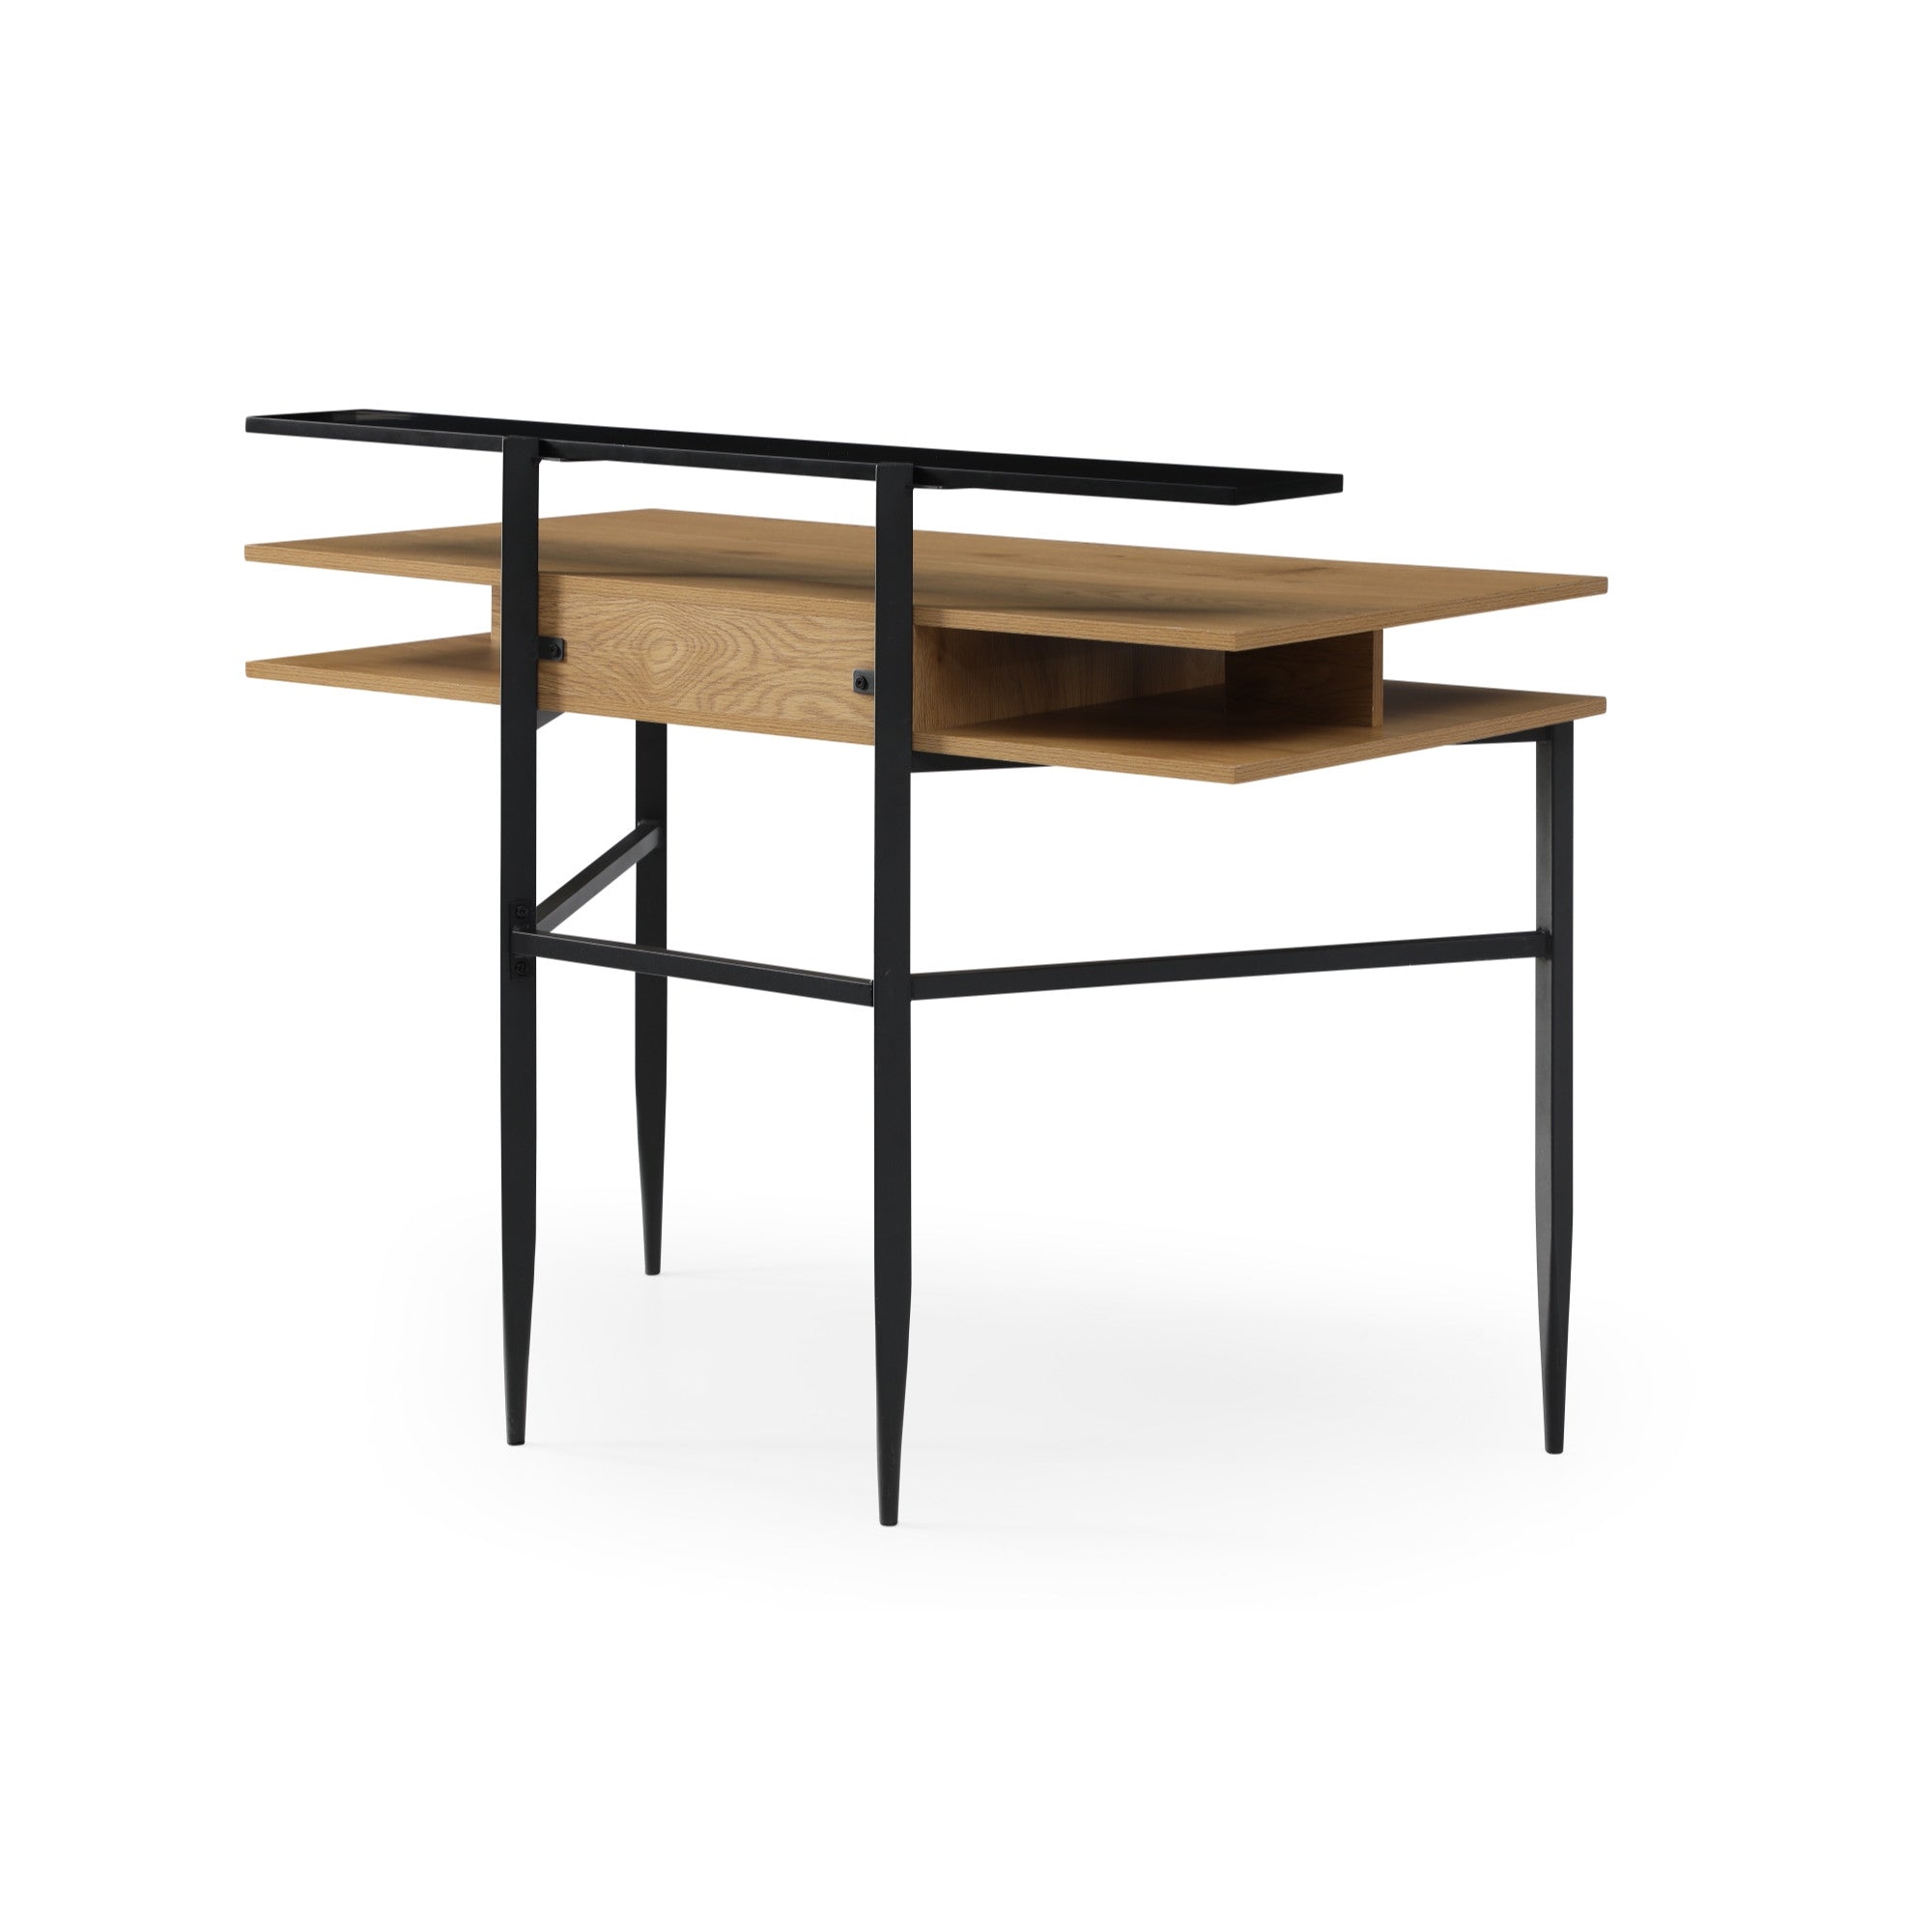 43" Gray and Black Writing Desk